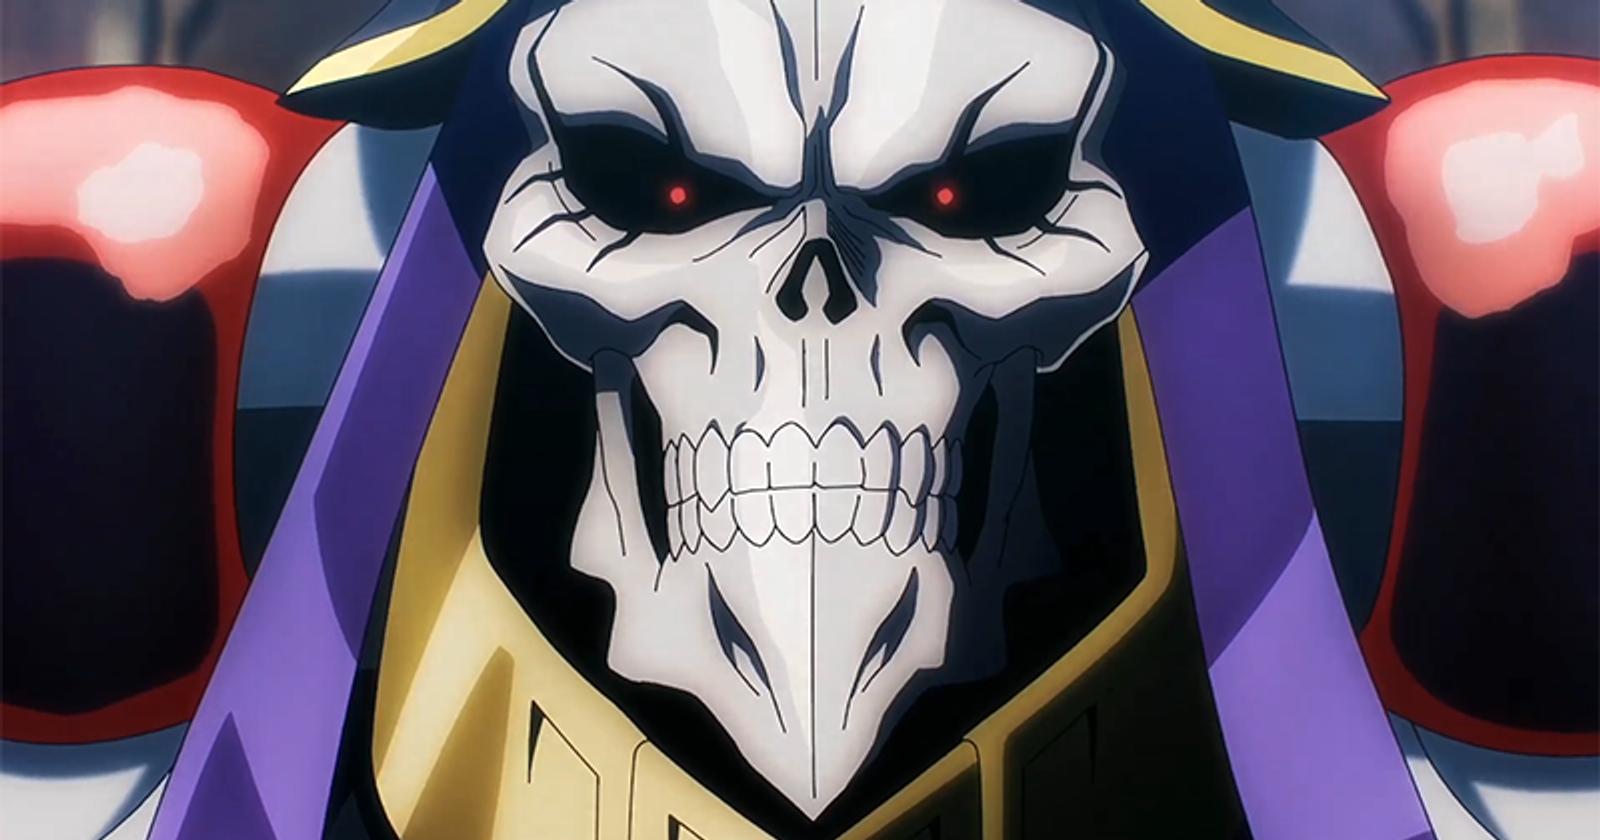 Just watched Overlord IV Episode 8. Did they really just skip the